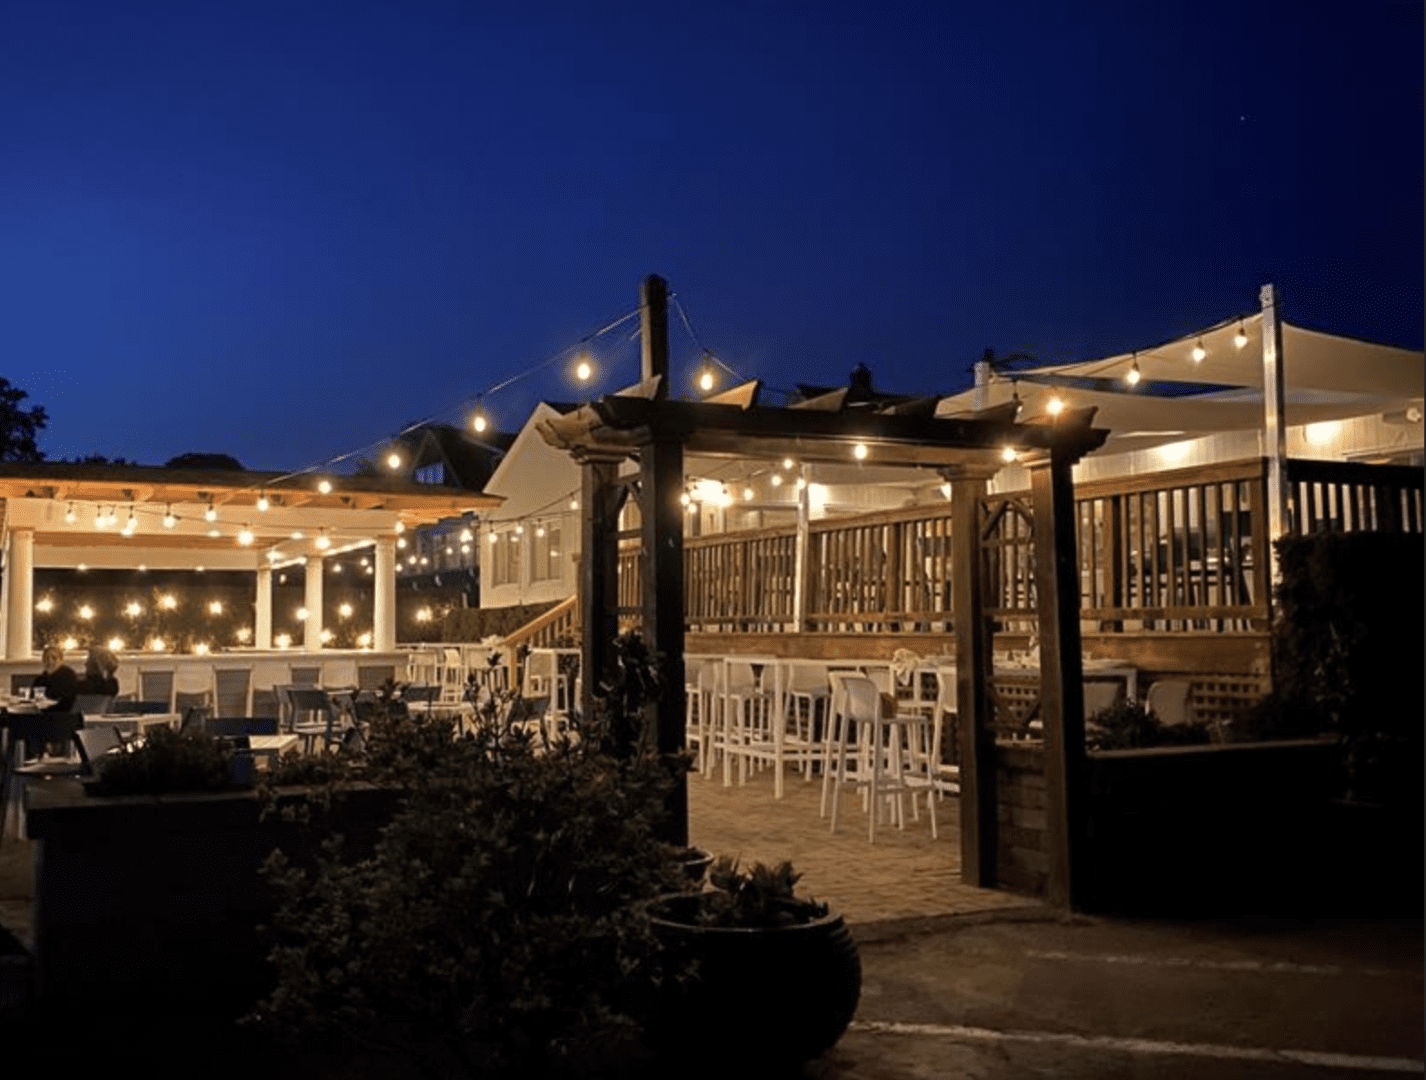 An outdoor dining area at night with string lights.